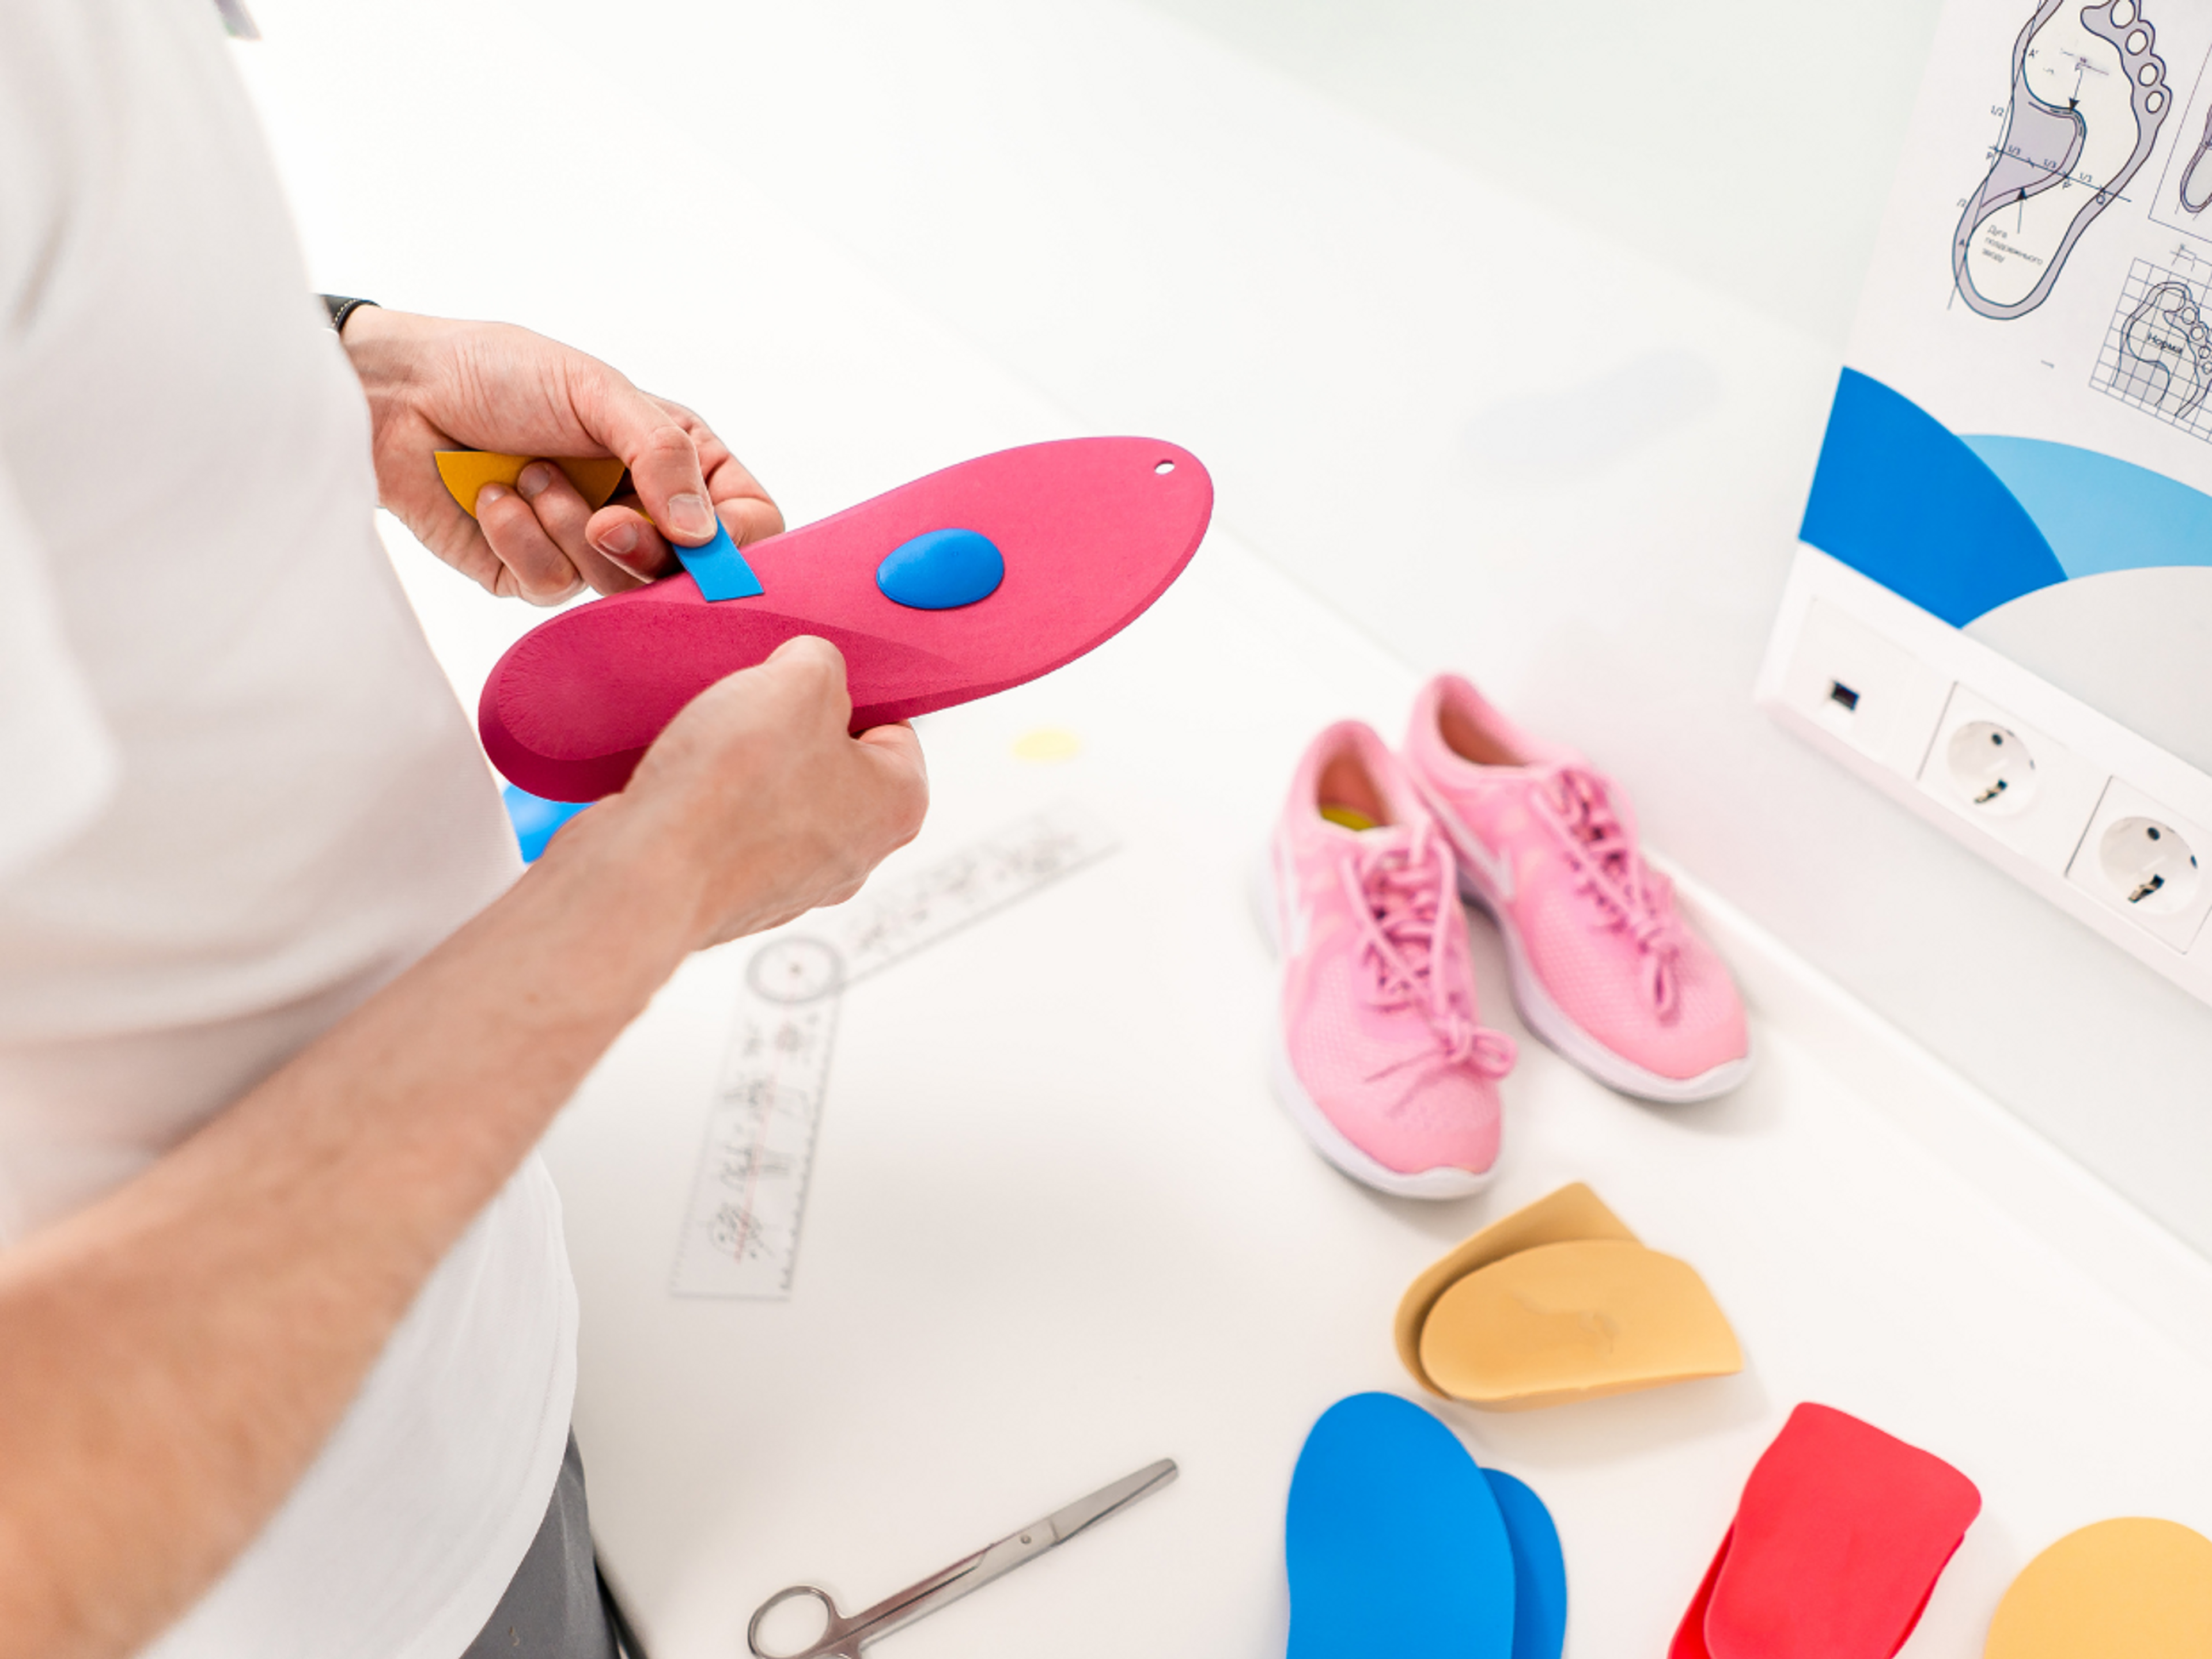 Custom orthotic are made to fit the exact features of your feet and may be useful for treating plantar fasciitis.